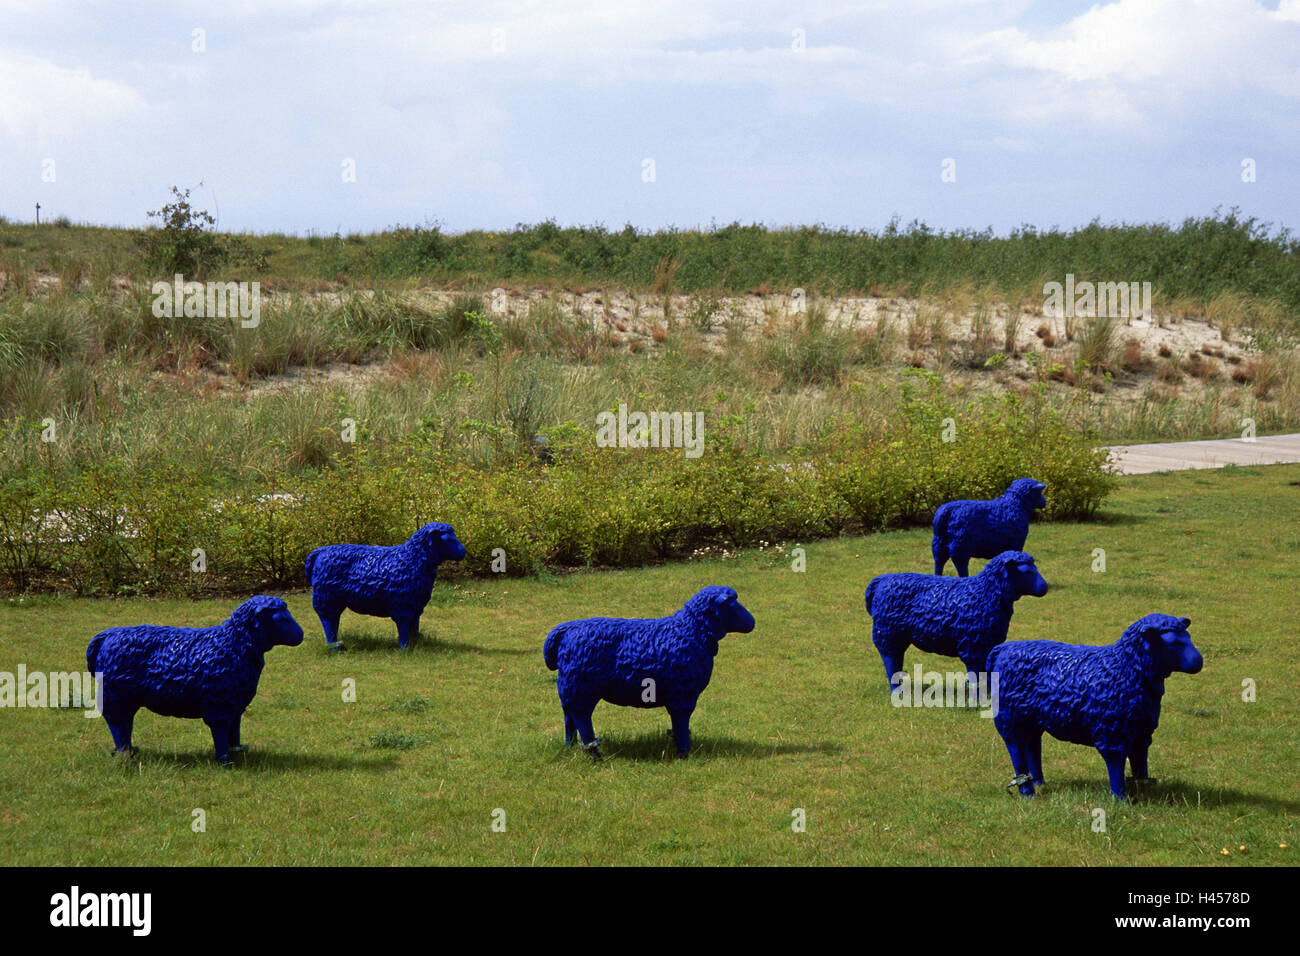 North Germany, Dierhagen-new house, art object blue sheep, dunes, Stock Photo